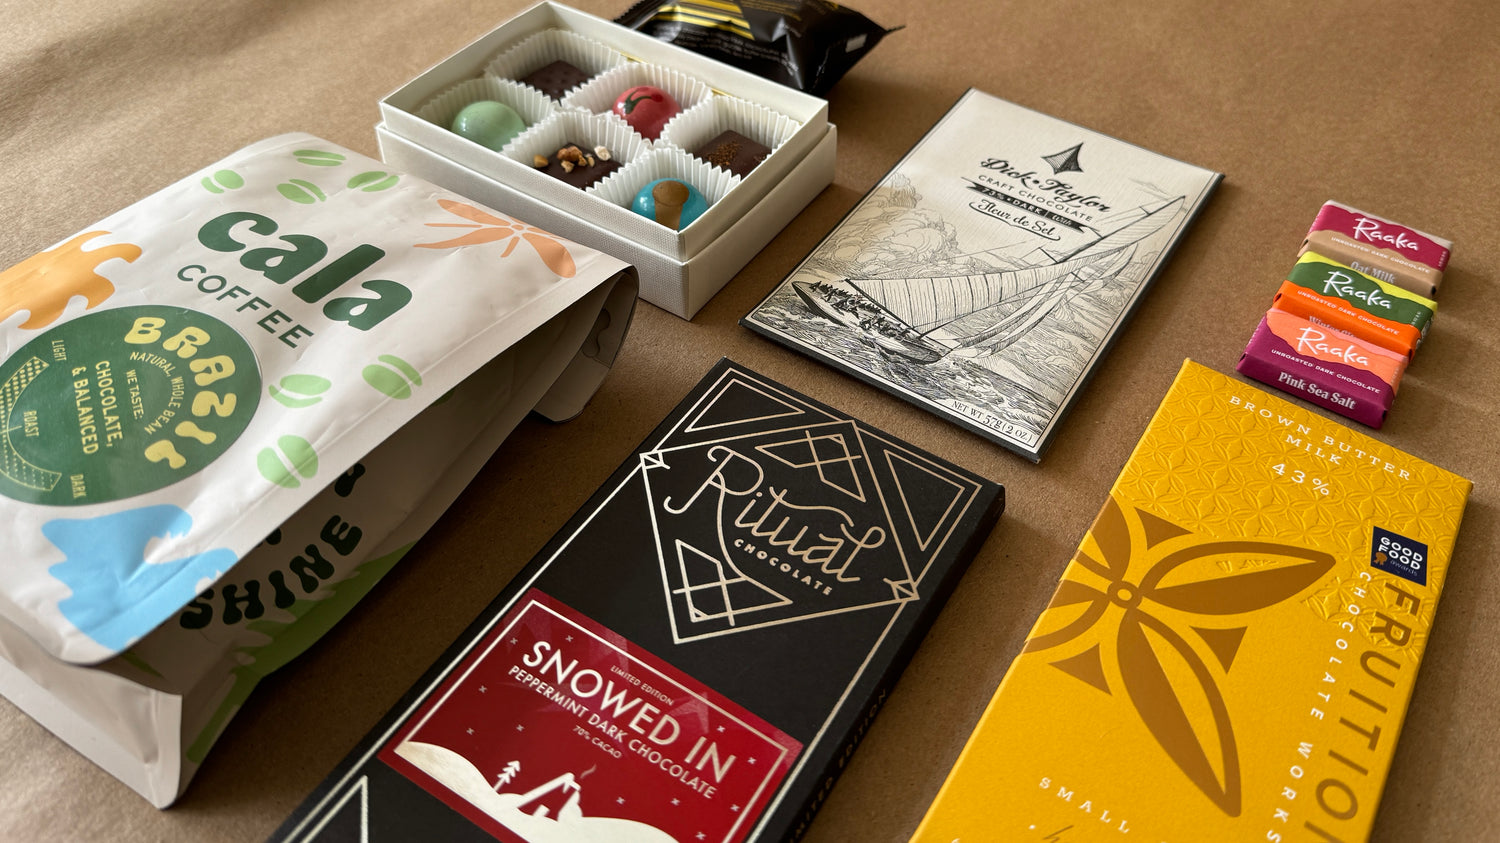 Curated selection of craft chocolate and coffee from makers such as Ritual Chocolate, Fruition Chocolate, Raaka, Dick Taylor Chocolate, Cala Coffee.